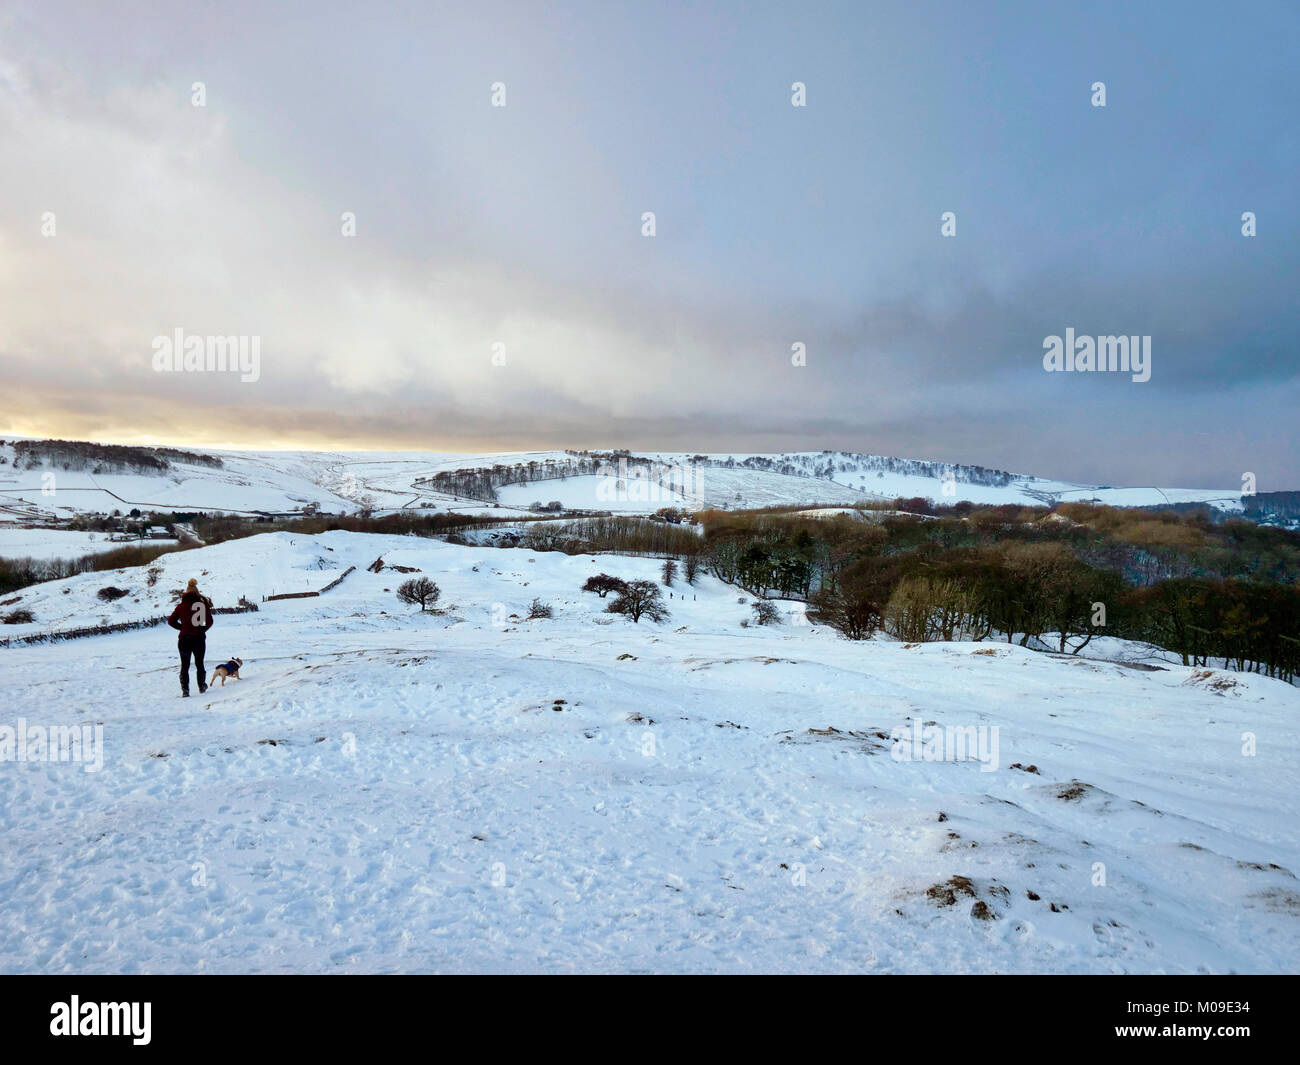 Buxton, Derbyshire, UK. 19th January, 2018.  UK Weather: Solomon's Temple Buxton Derbyshire, dog walkers in the snow near Solomon's Temple also called Grinlow Tower the Victorian Fortified hill marker above the spa town of Buxton in the Derbyshire Peak District National Park Credit: Doug Blane/Alamy Live News Credit: Doug Blane/Alamy Live News Stock Photo